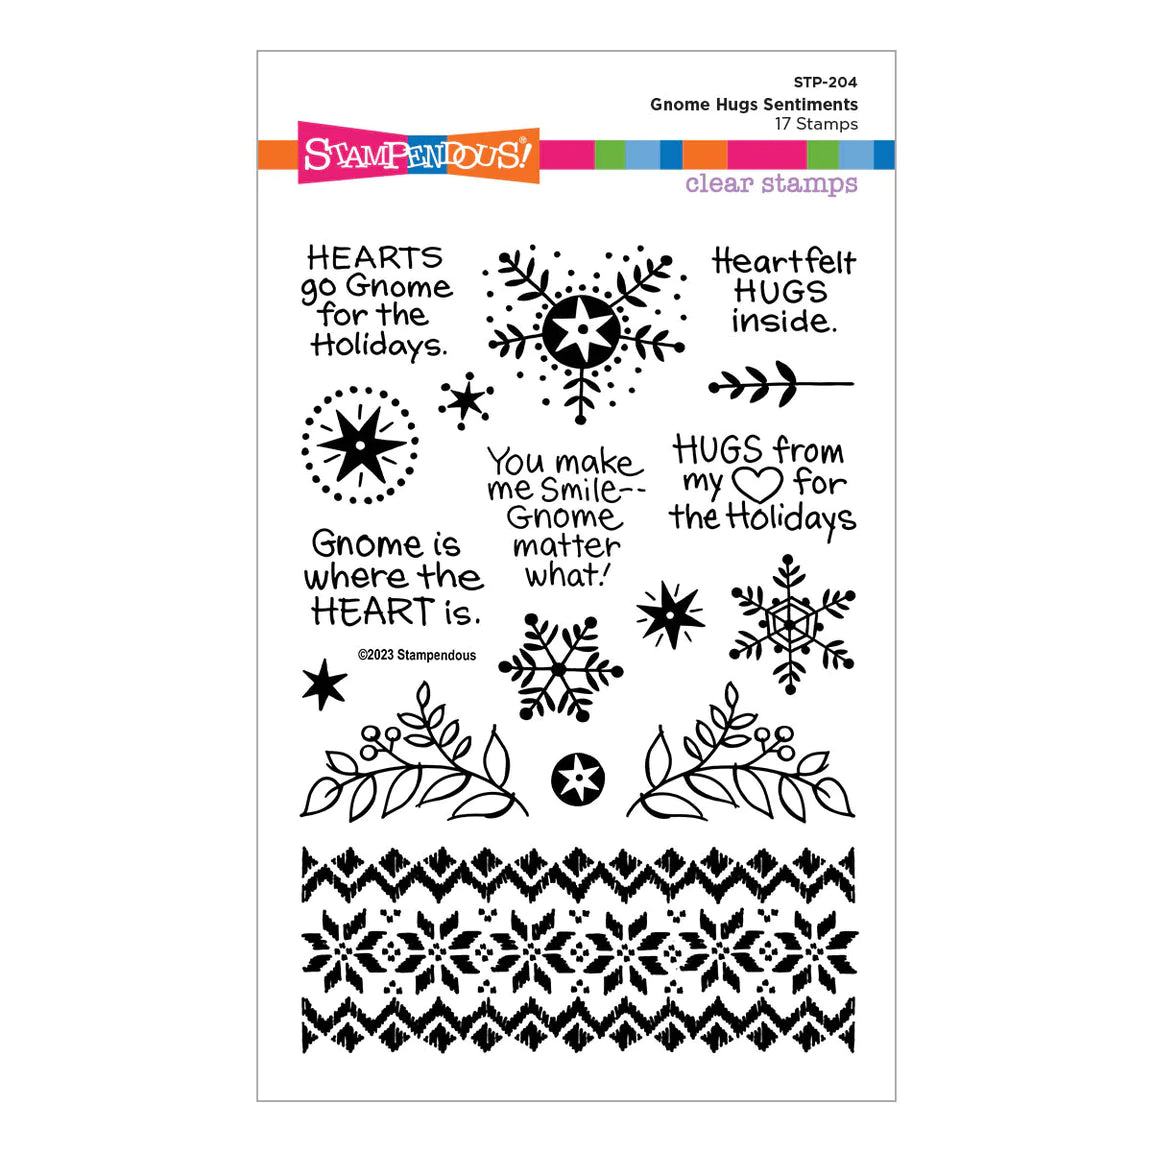 Stampendous Clear Stamp Set Gnome Hugs Sentiments - STP-204